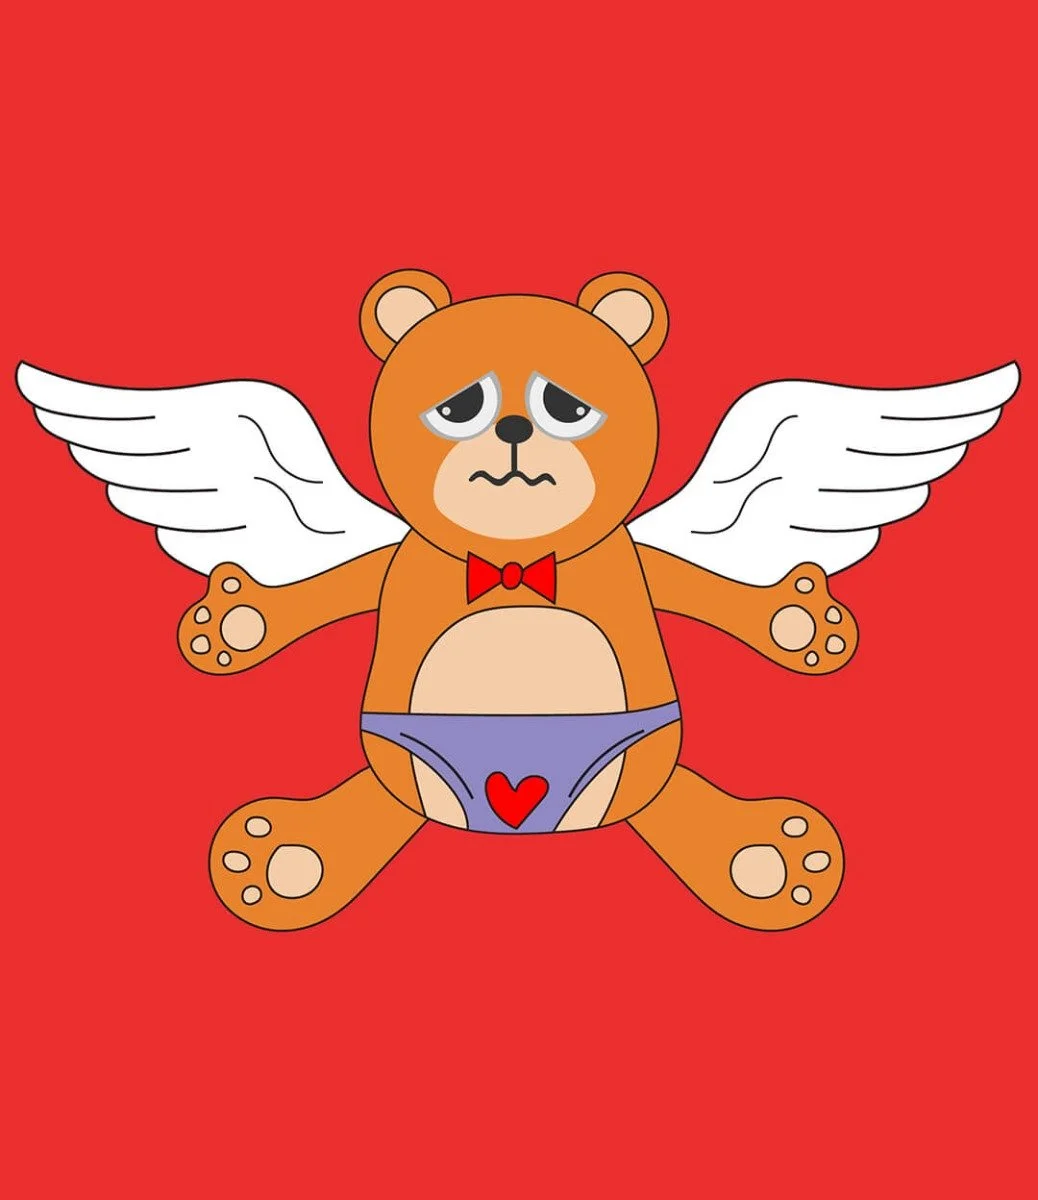 Kawaii Red Bear Limited Edition NFT By Ouss Billy